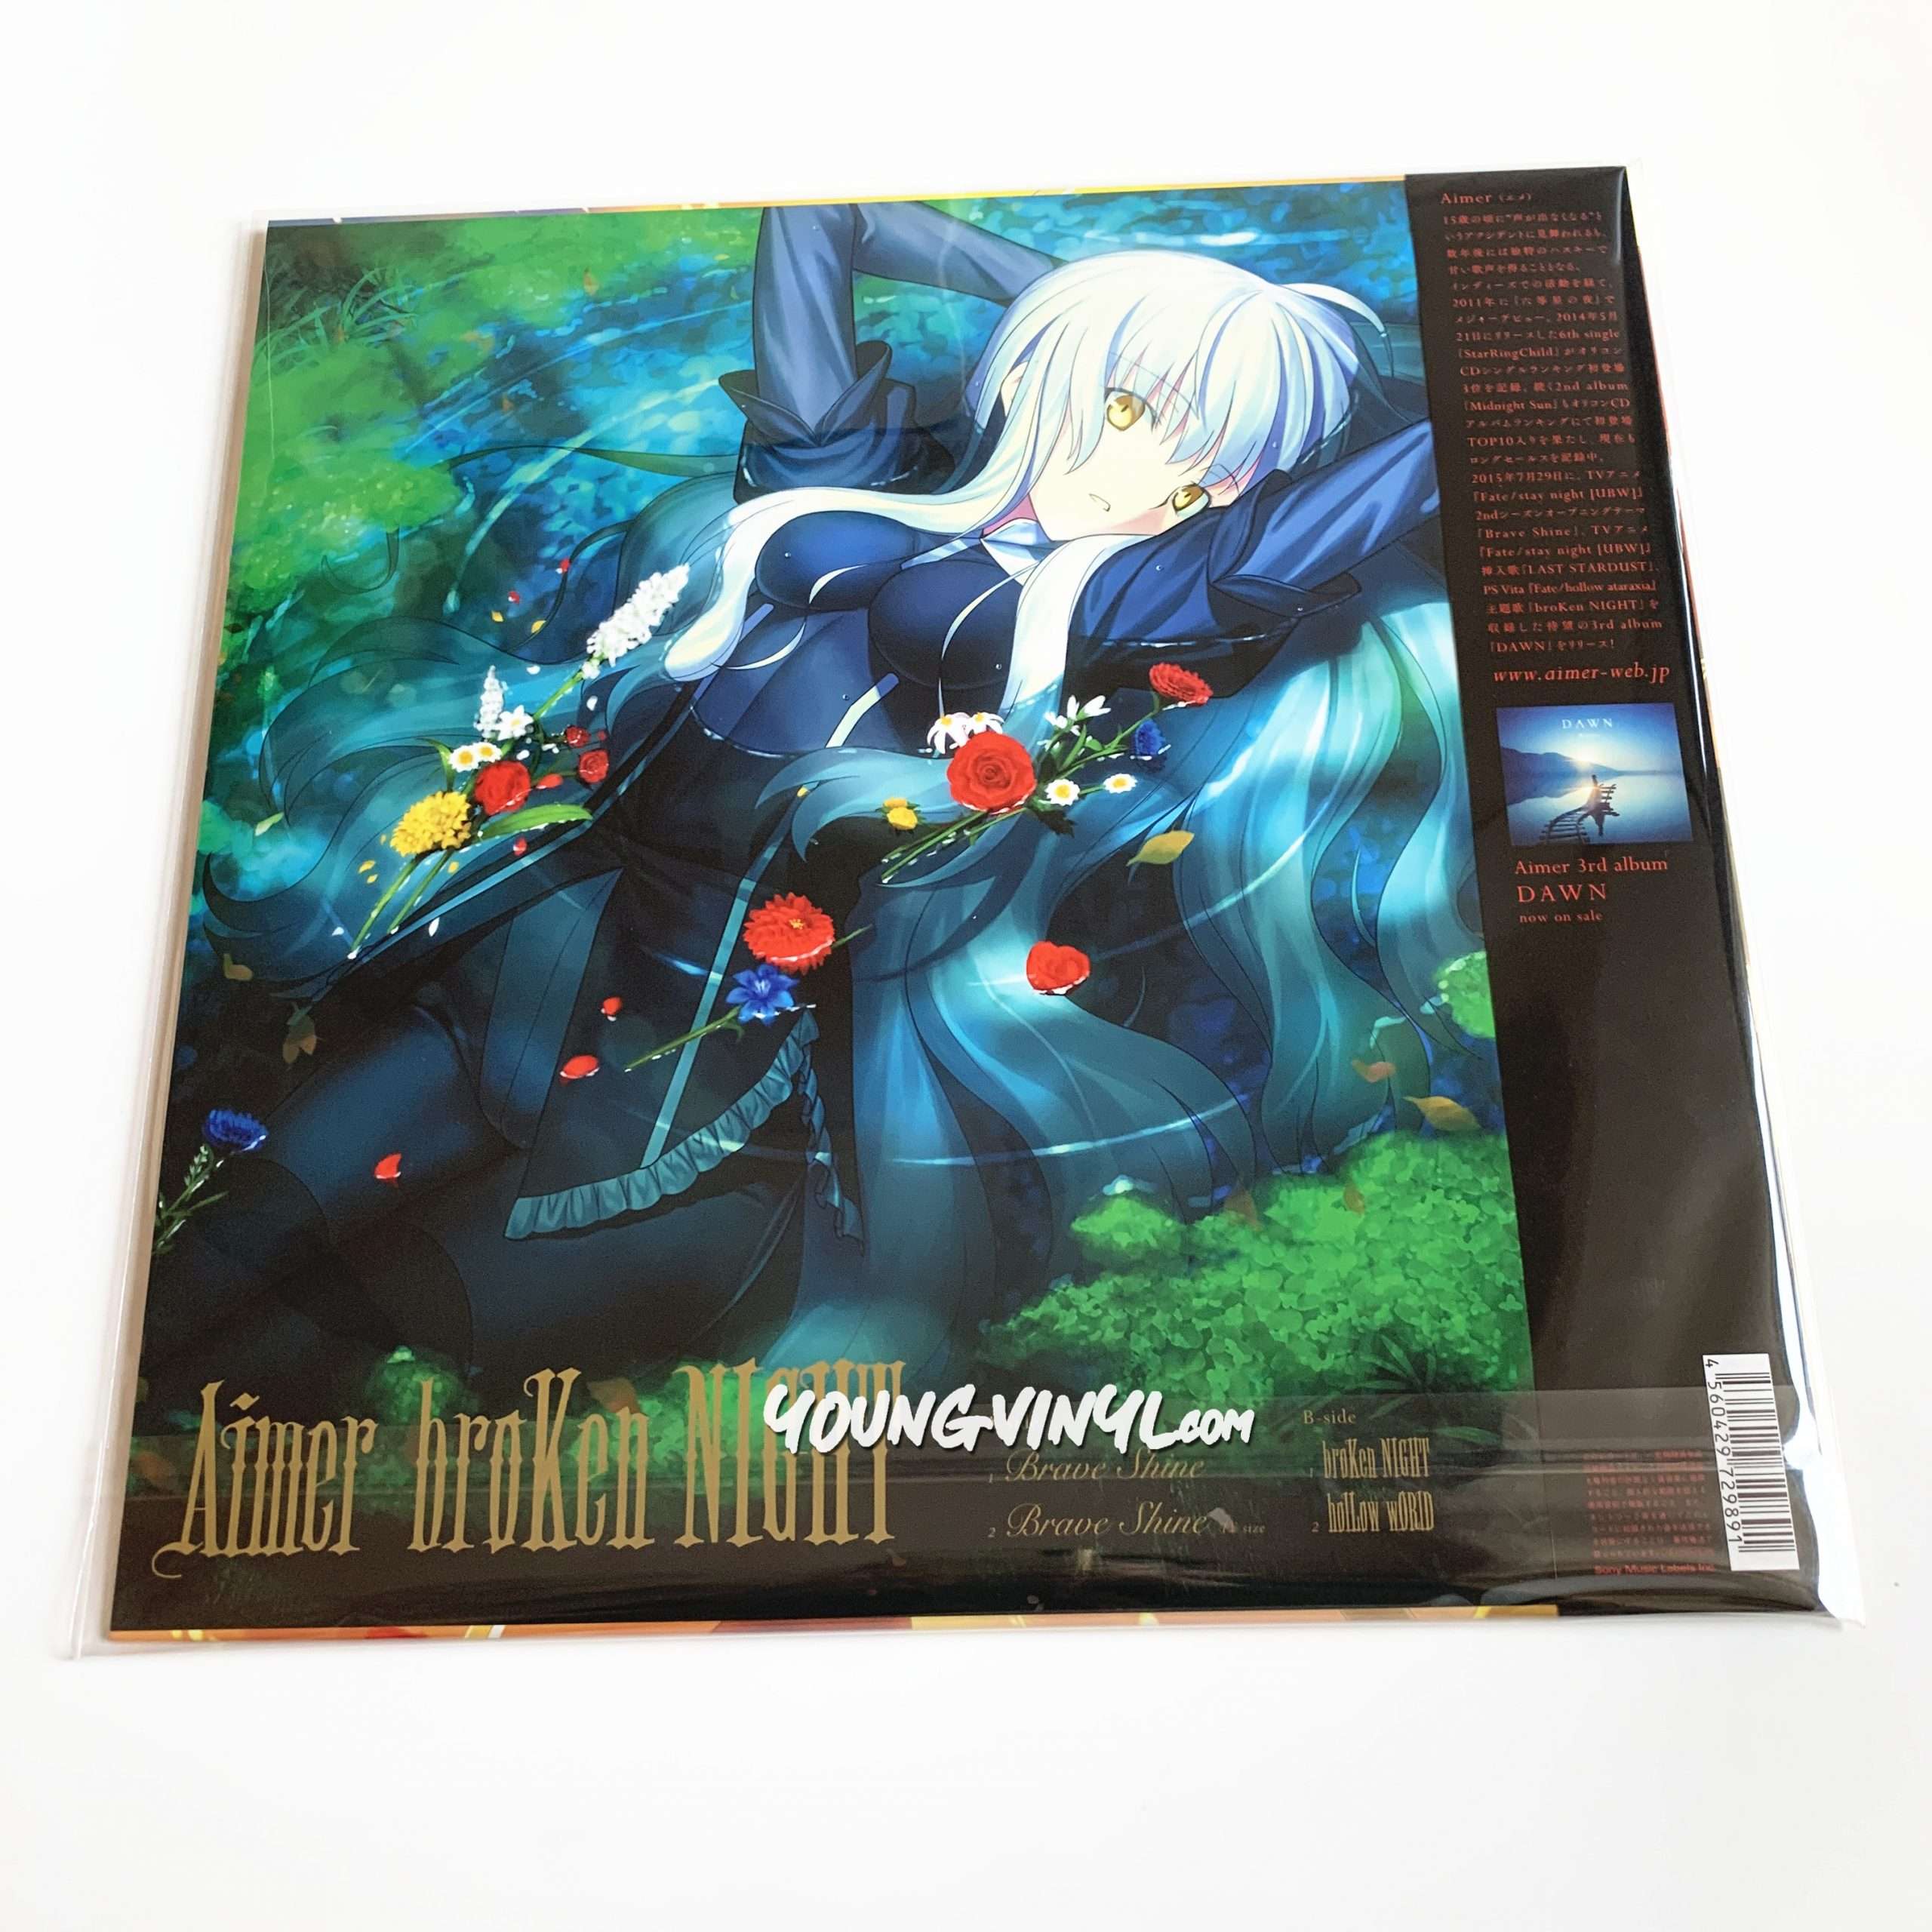 Aimer Brave Shine Limited Vinyl fate stay night op - Young Vinyl